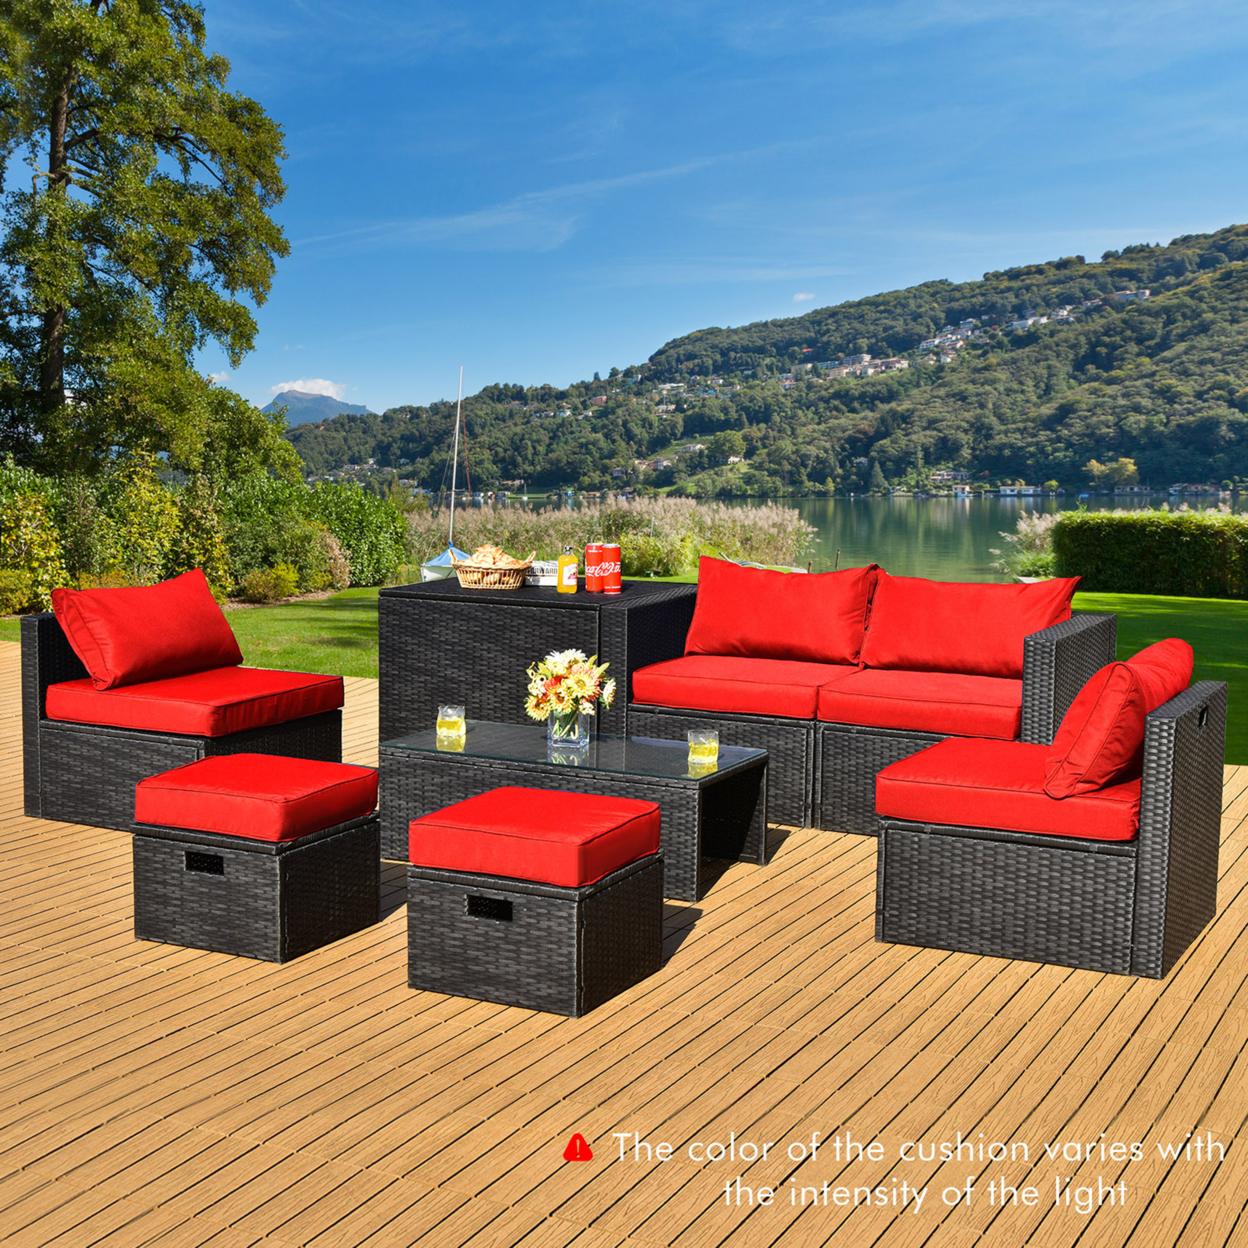 8PCS Rattan Patio Sectional Furniture Set W/ Waterproof Cover & Red Cushions